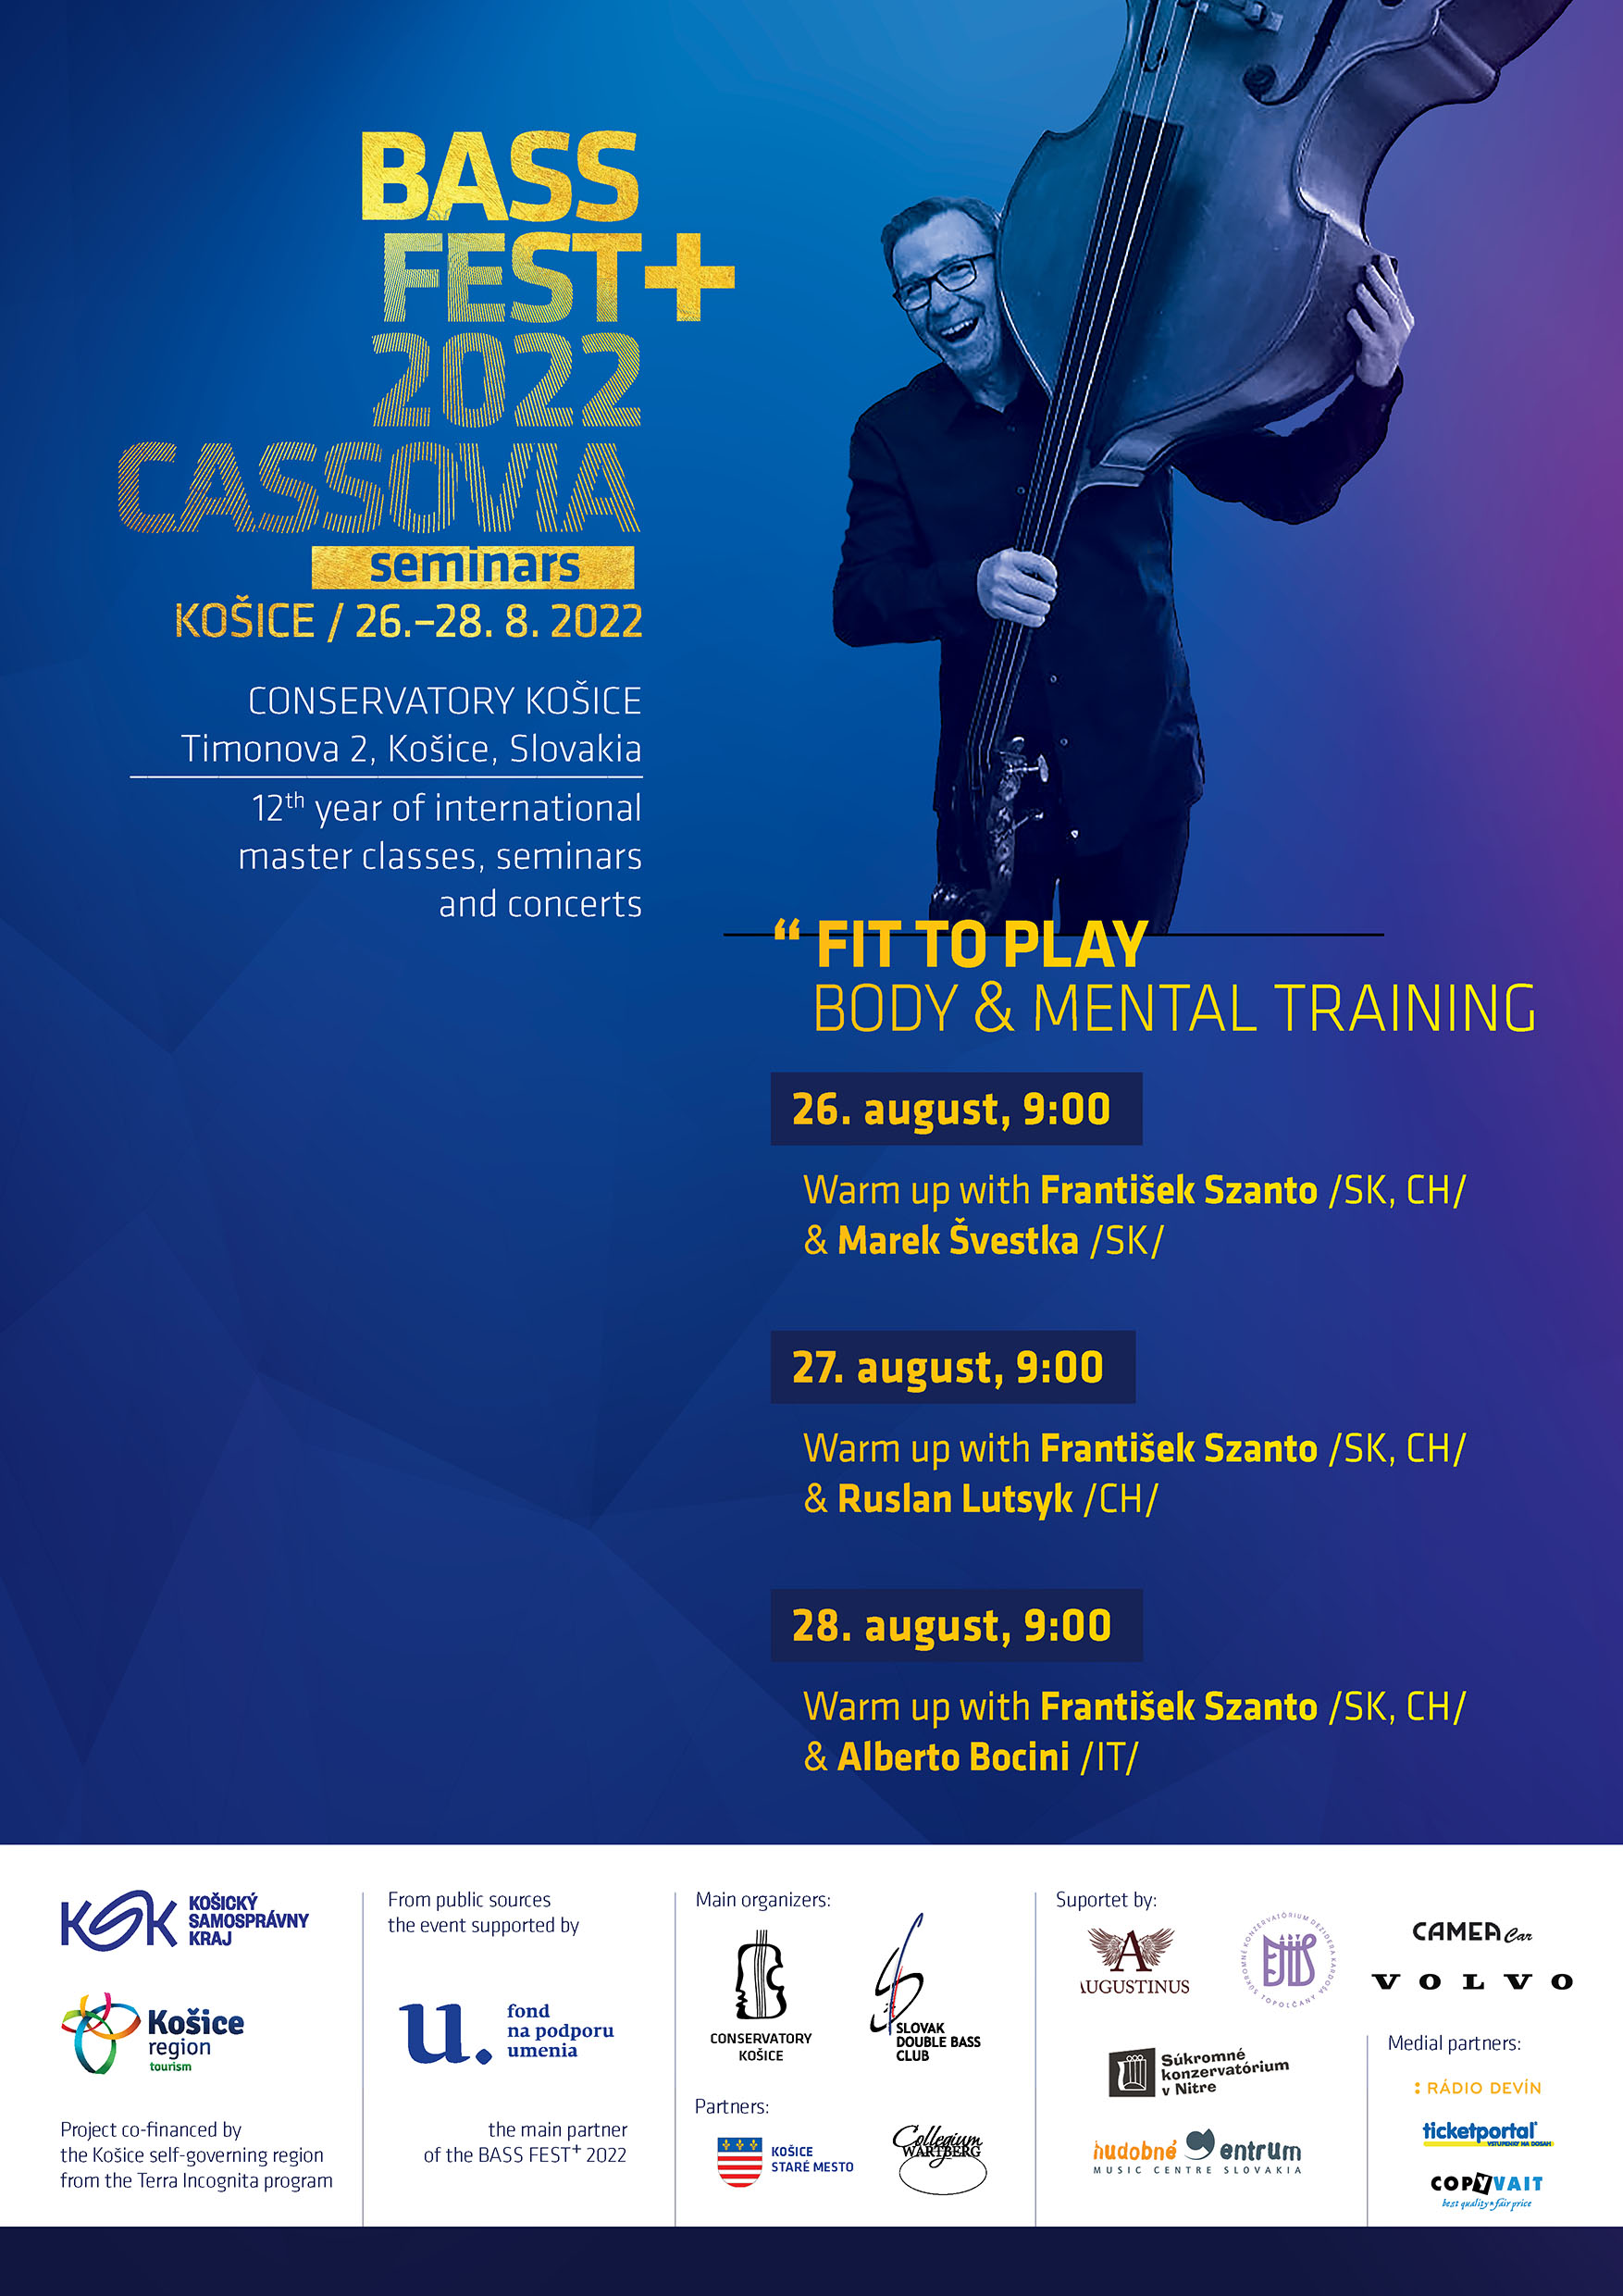 „Fit to play“ and warm up with František Szanto